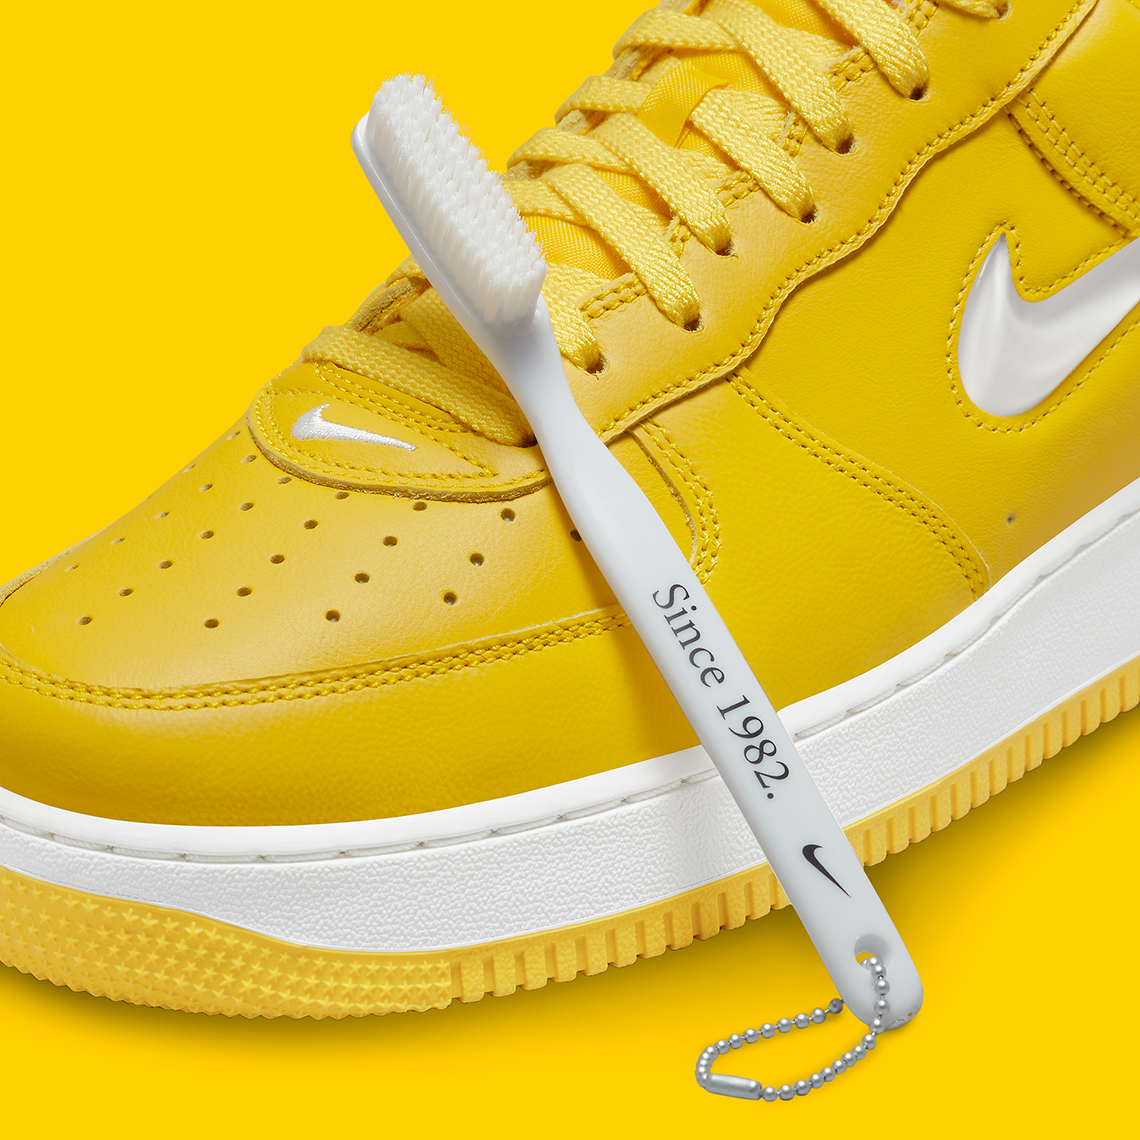 nike air force 1 low color of the month yellow fj1044 700 7